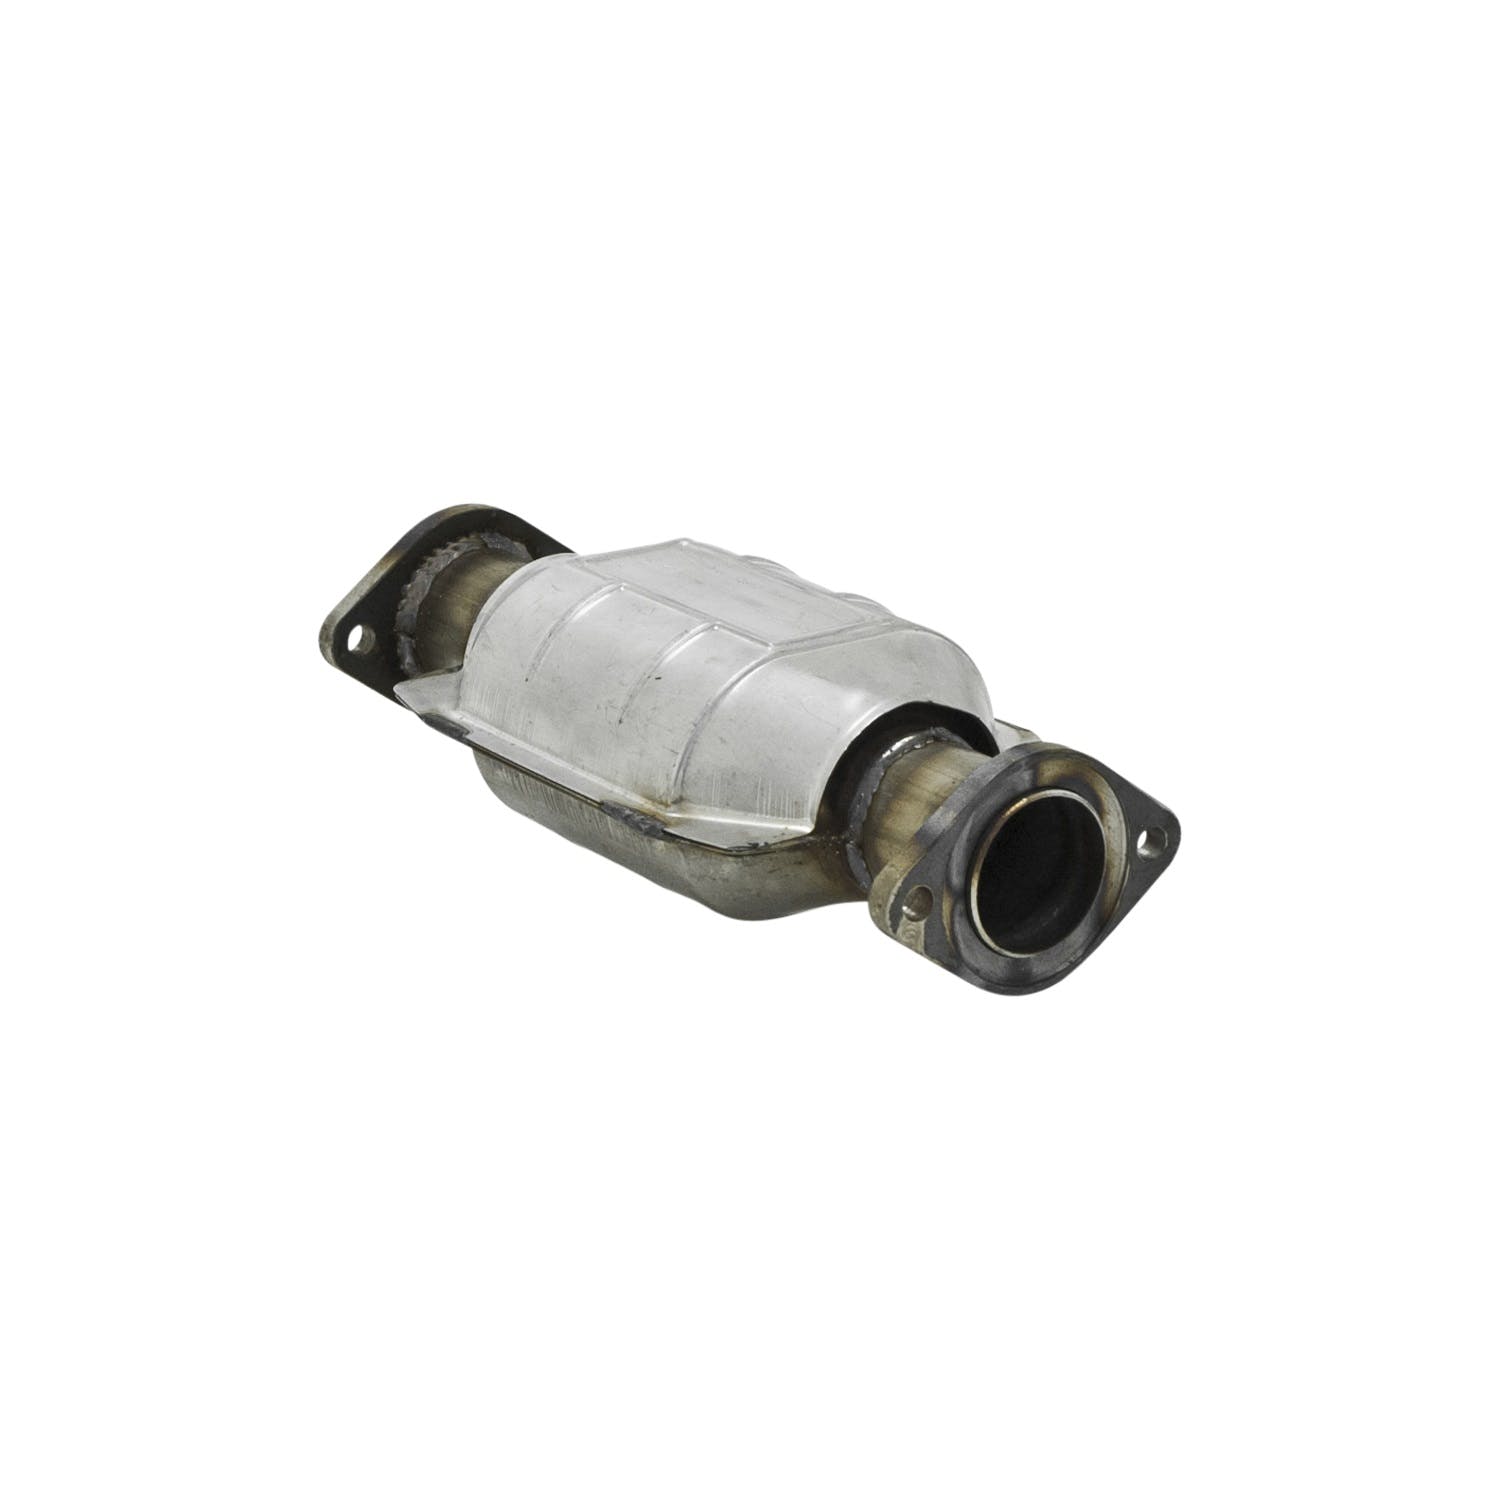 Flowmaster Catalytic Converters 2050001 Catalytic Converter-Direct Fit-2.25 in Inlet/Outlet-49 State